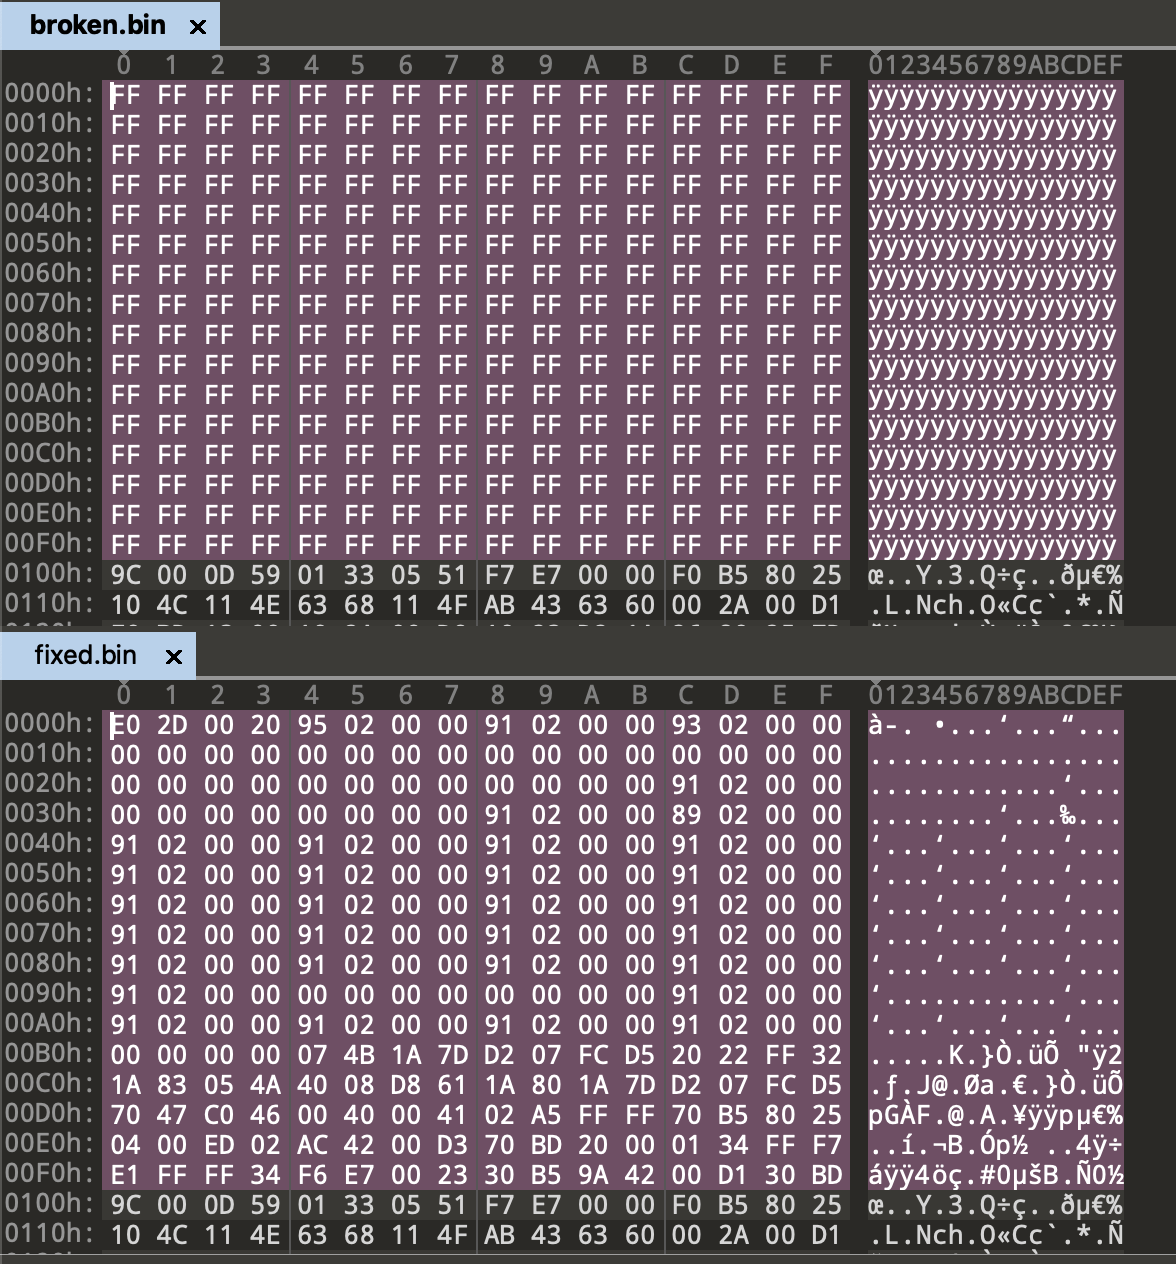 A screenshot of a hex editor comparing two files, the first one showing empty values for the first 256 bytes